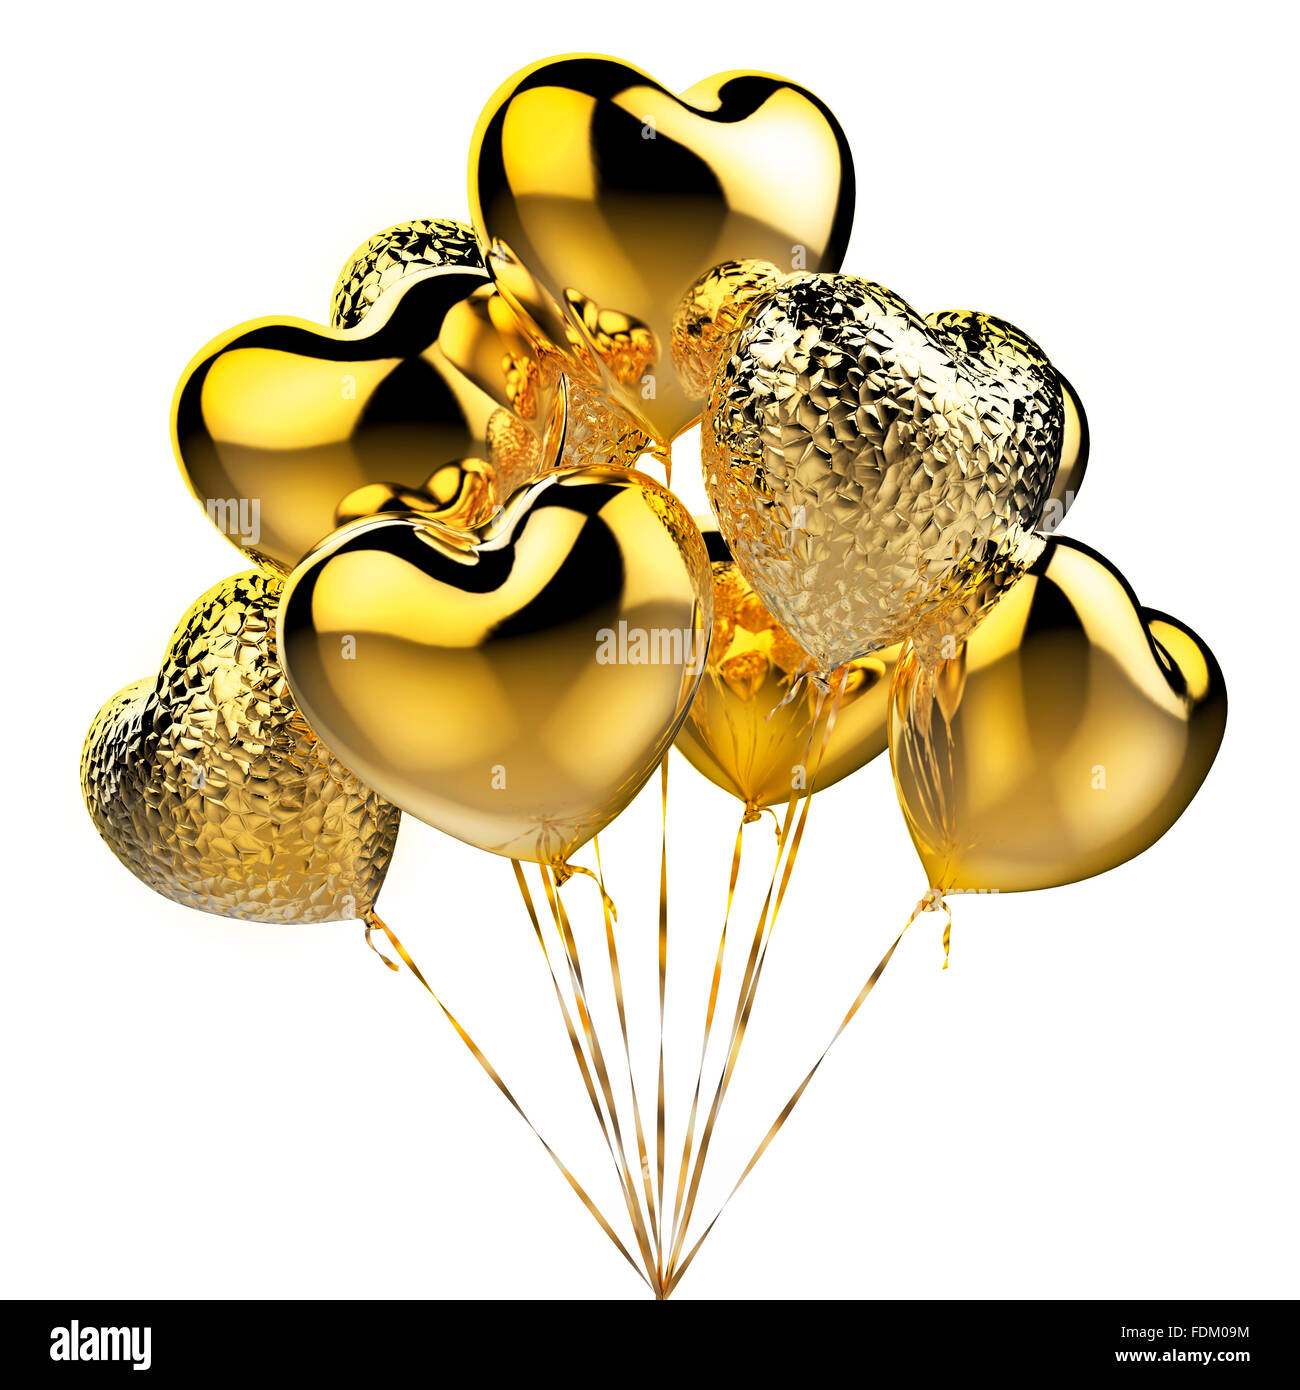 Golden balloons in the shape of heart for celebration Stock Photo - Alamy